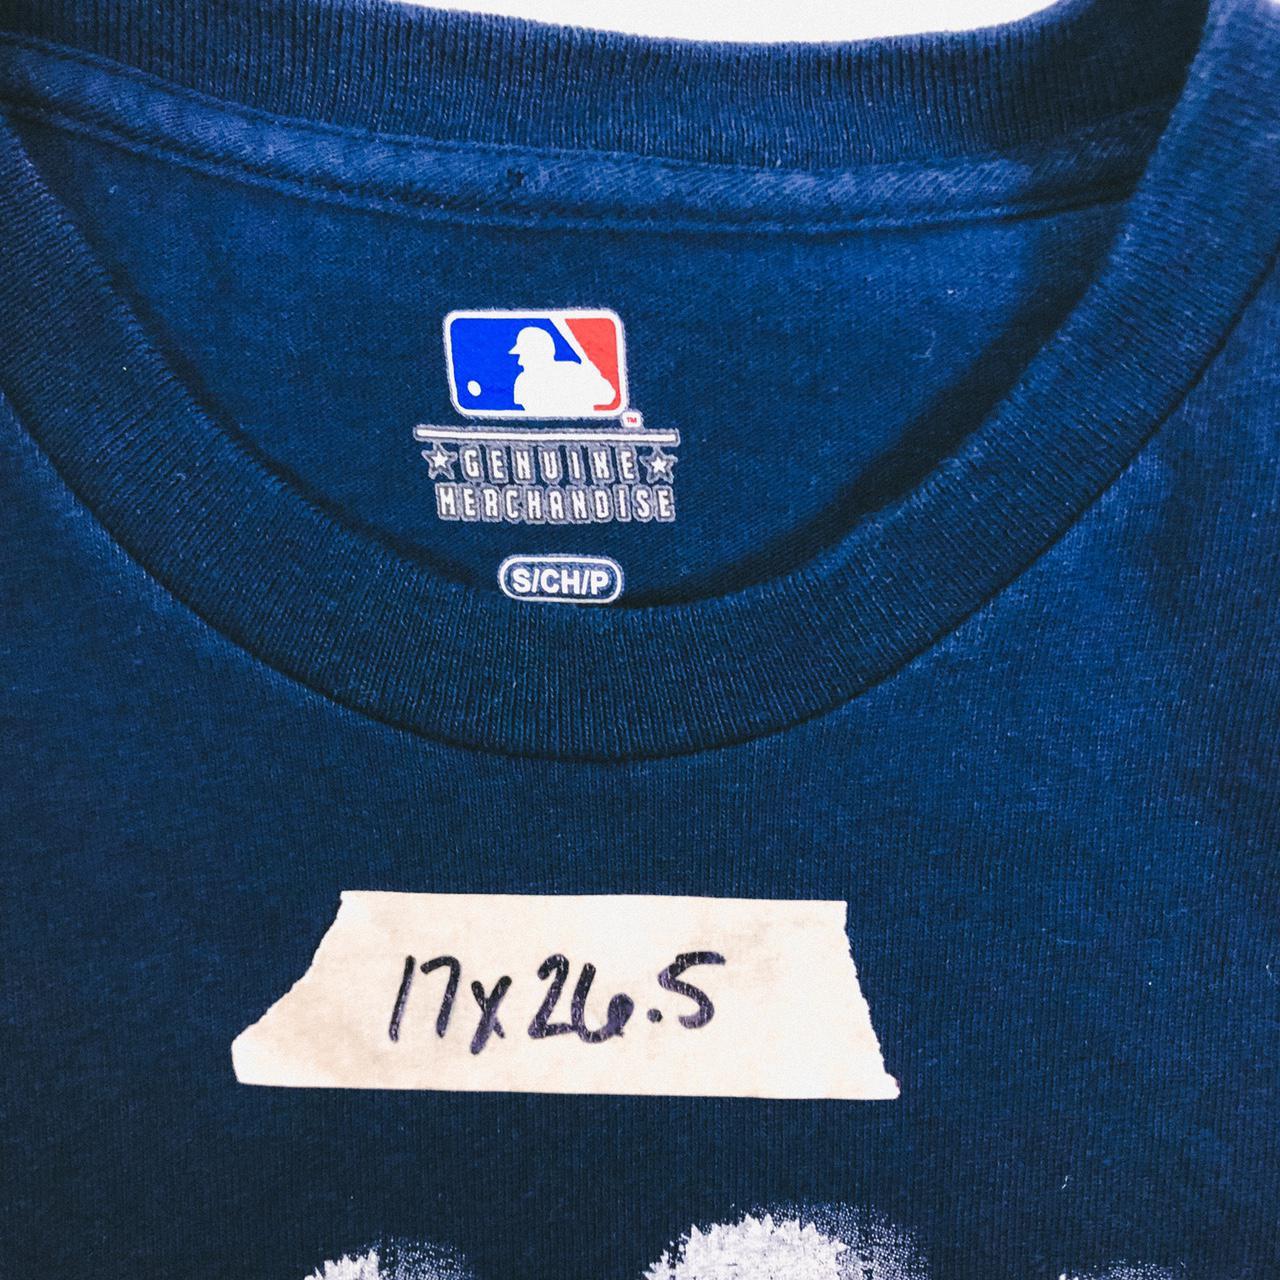 Product Image 4 - Houston Astros Tee Size S
/
8/10
/
This